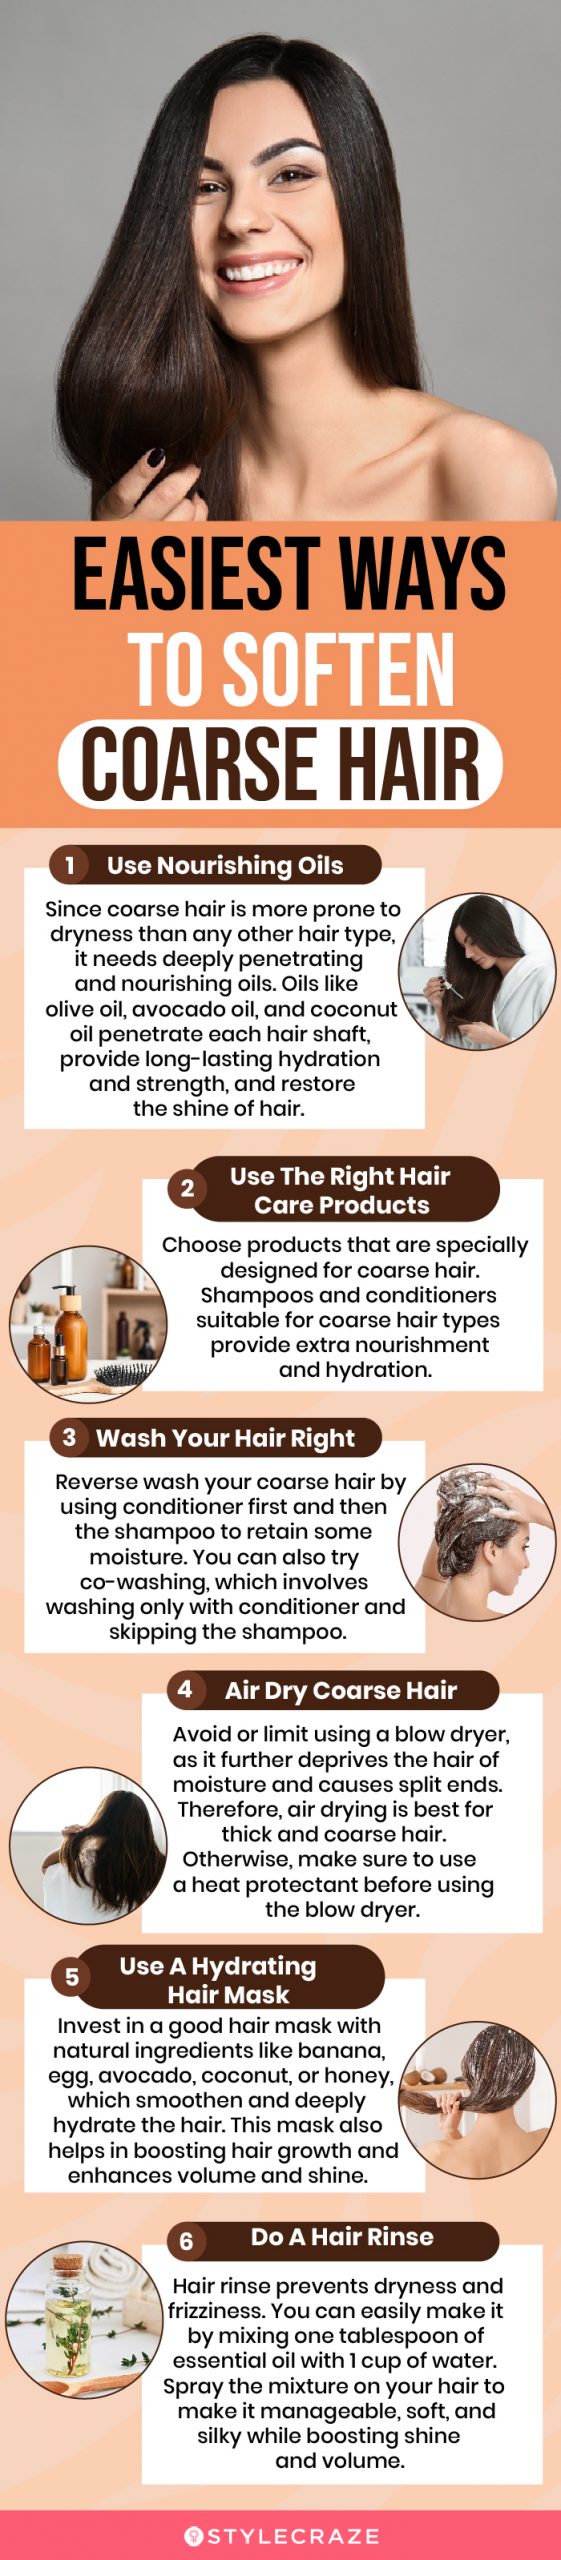 easiest ways to soften coarse hair (infographic)